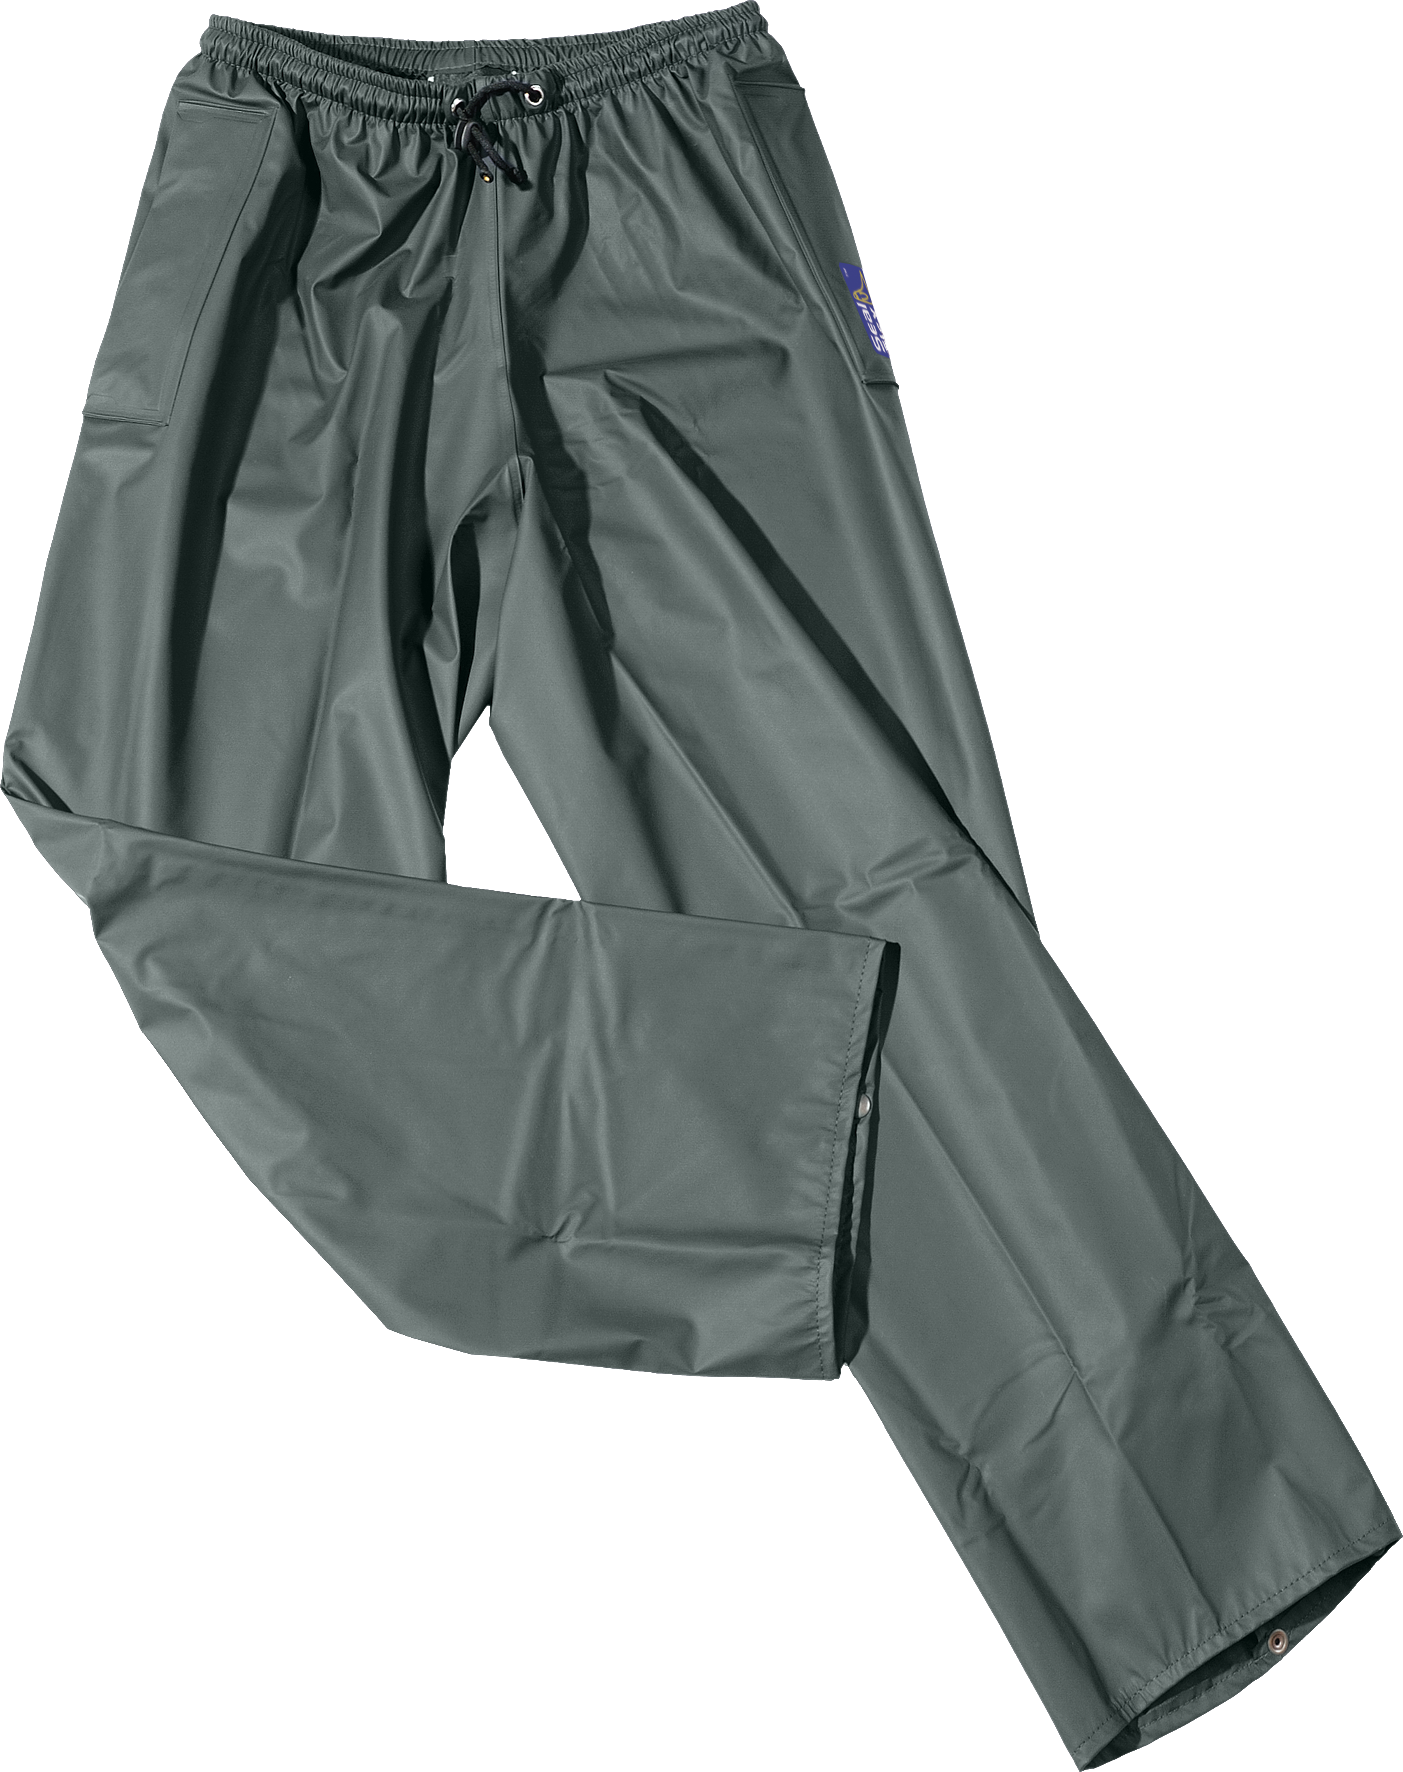 SealFlex Overtrousers. Superior wet weather protection. High-quality  lightweight, breathable, and comfortable material. Outdoor clothes suitable  for activities such as construction, farming, hunting, fishing, hiking or  camping. Water repellent rain